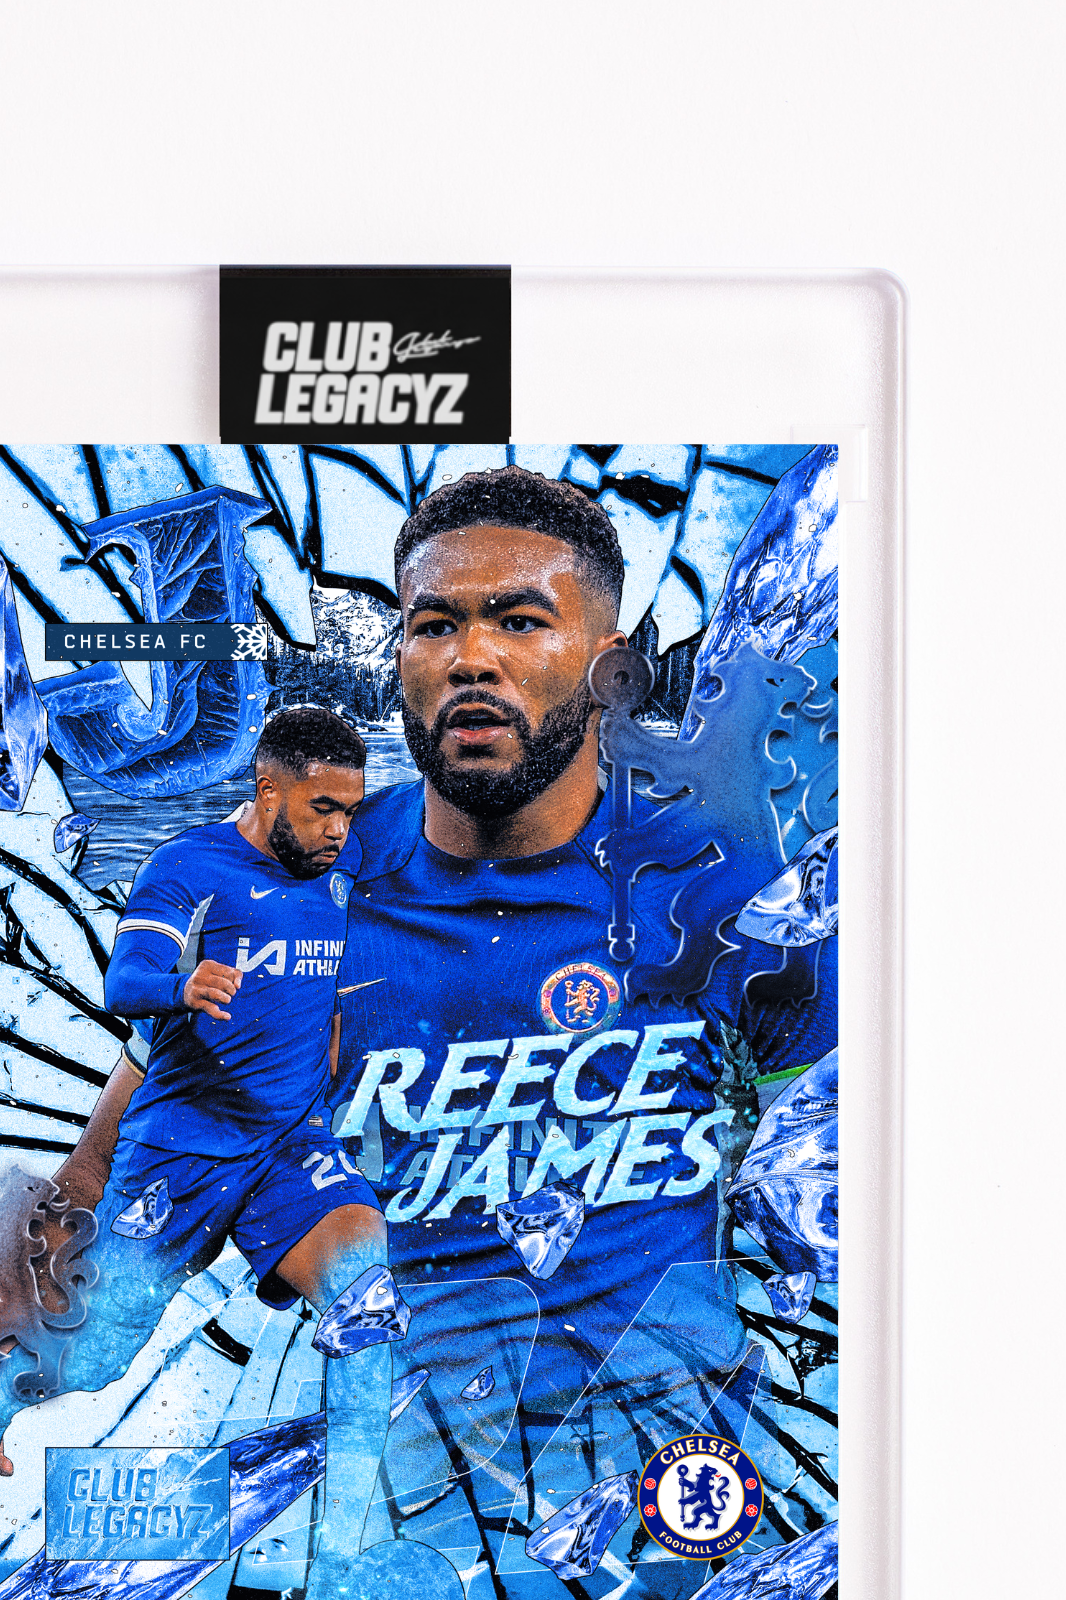 Chelsea FC - Reece James Frozen Icon limited to 100